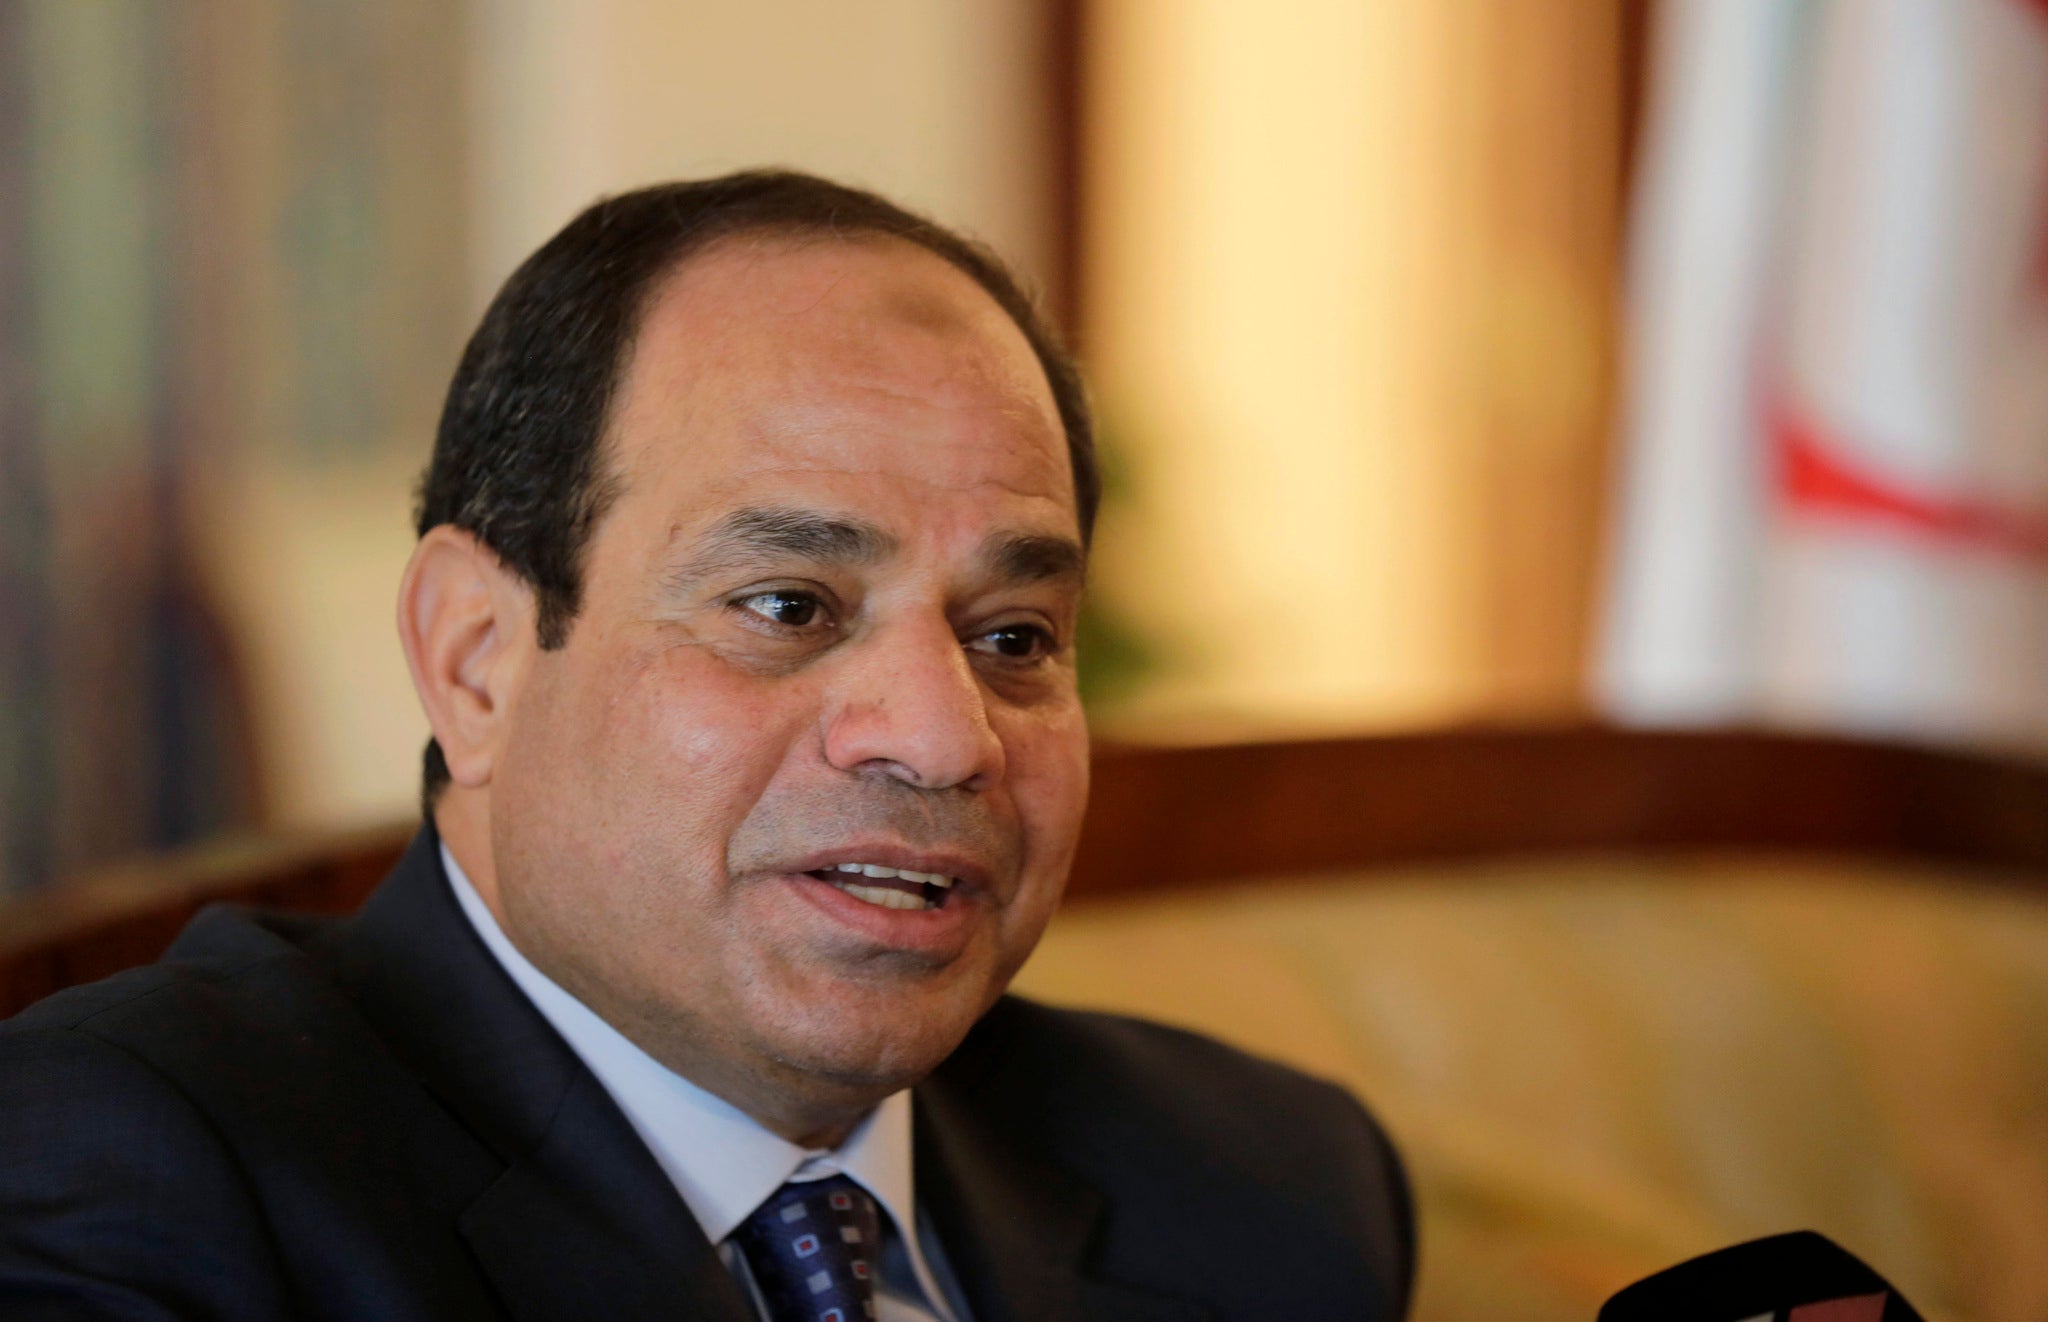 Egypt's new president al-Sisi said he wished the journalists had never stood trial